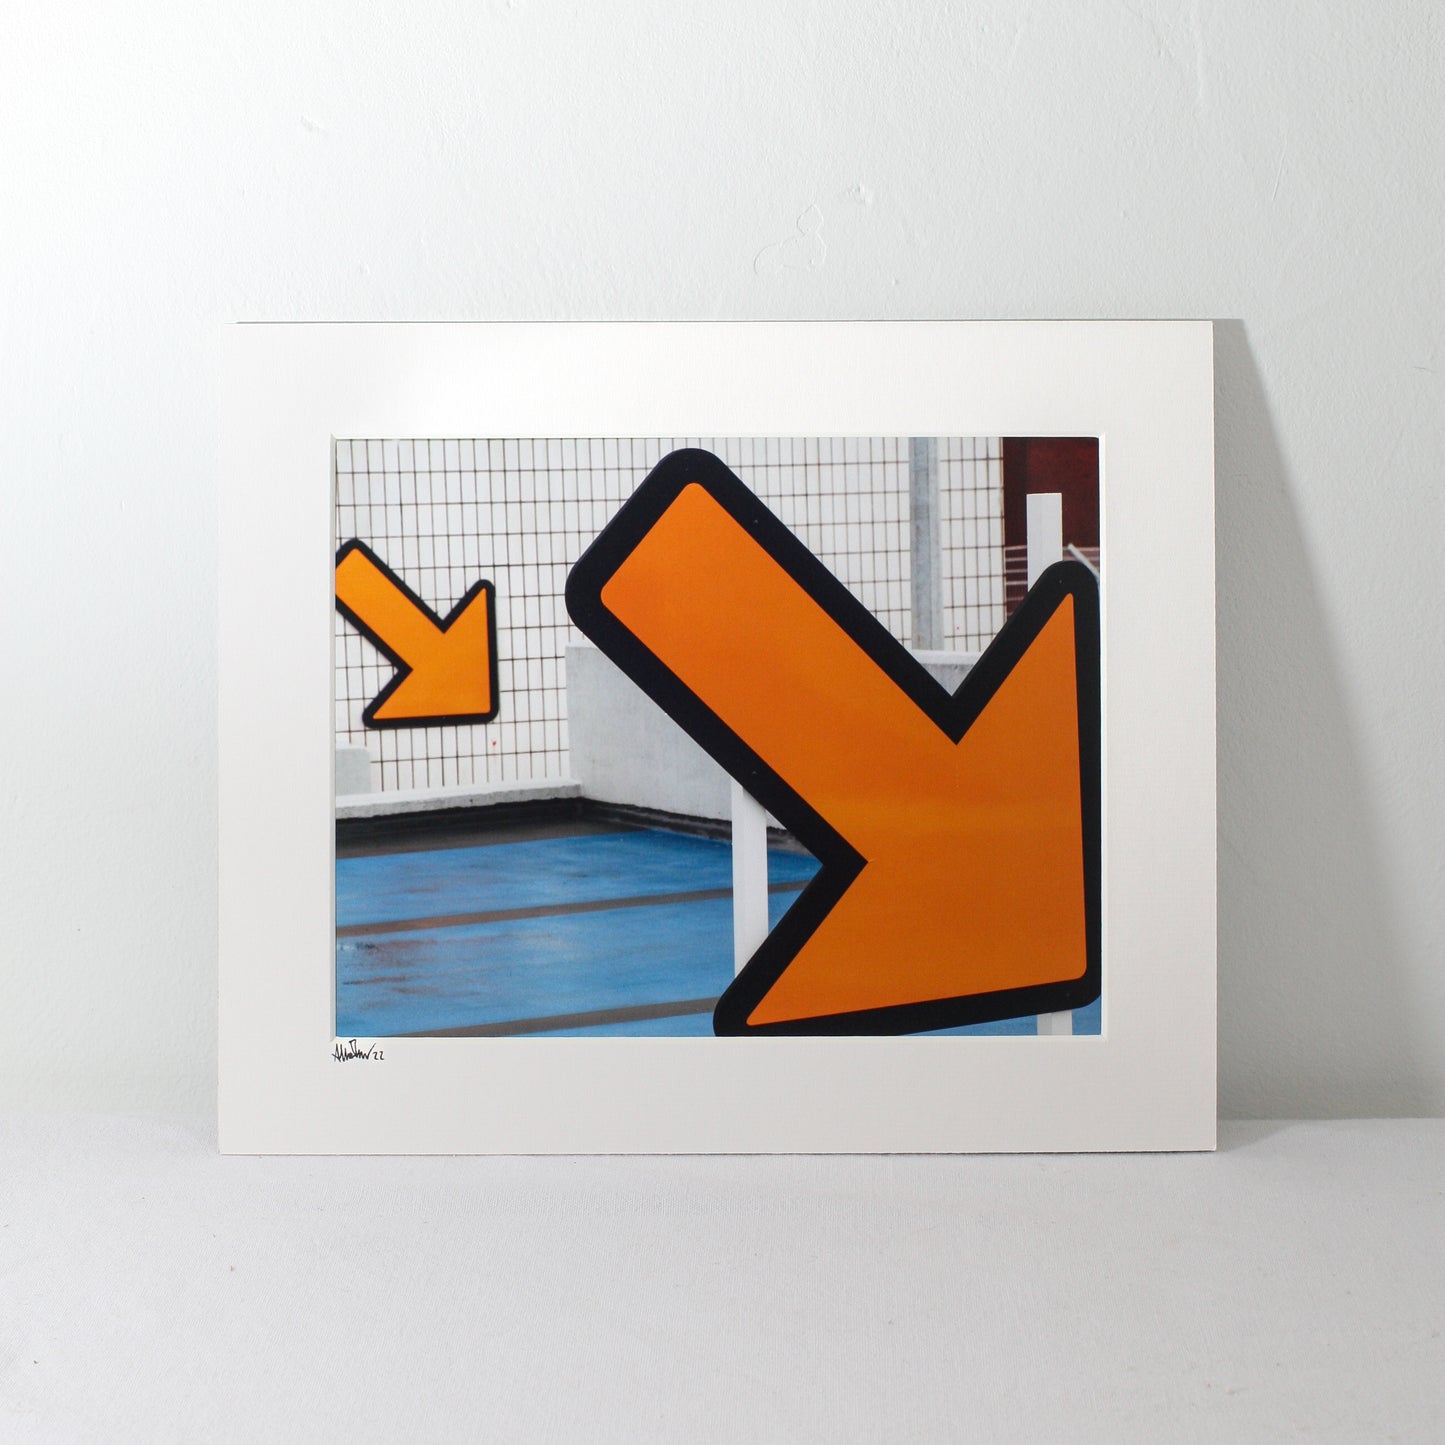 a mounted picture of orange arrows from preston bus station car park